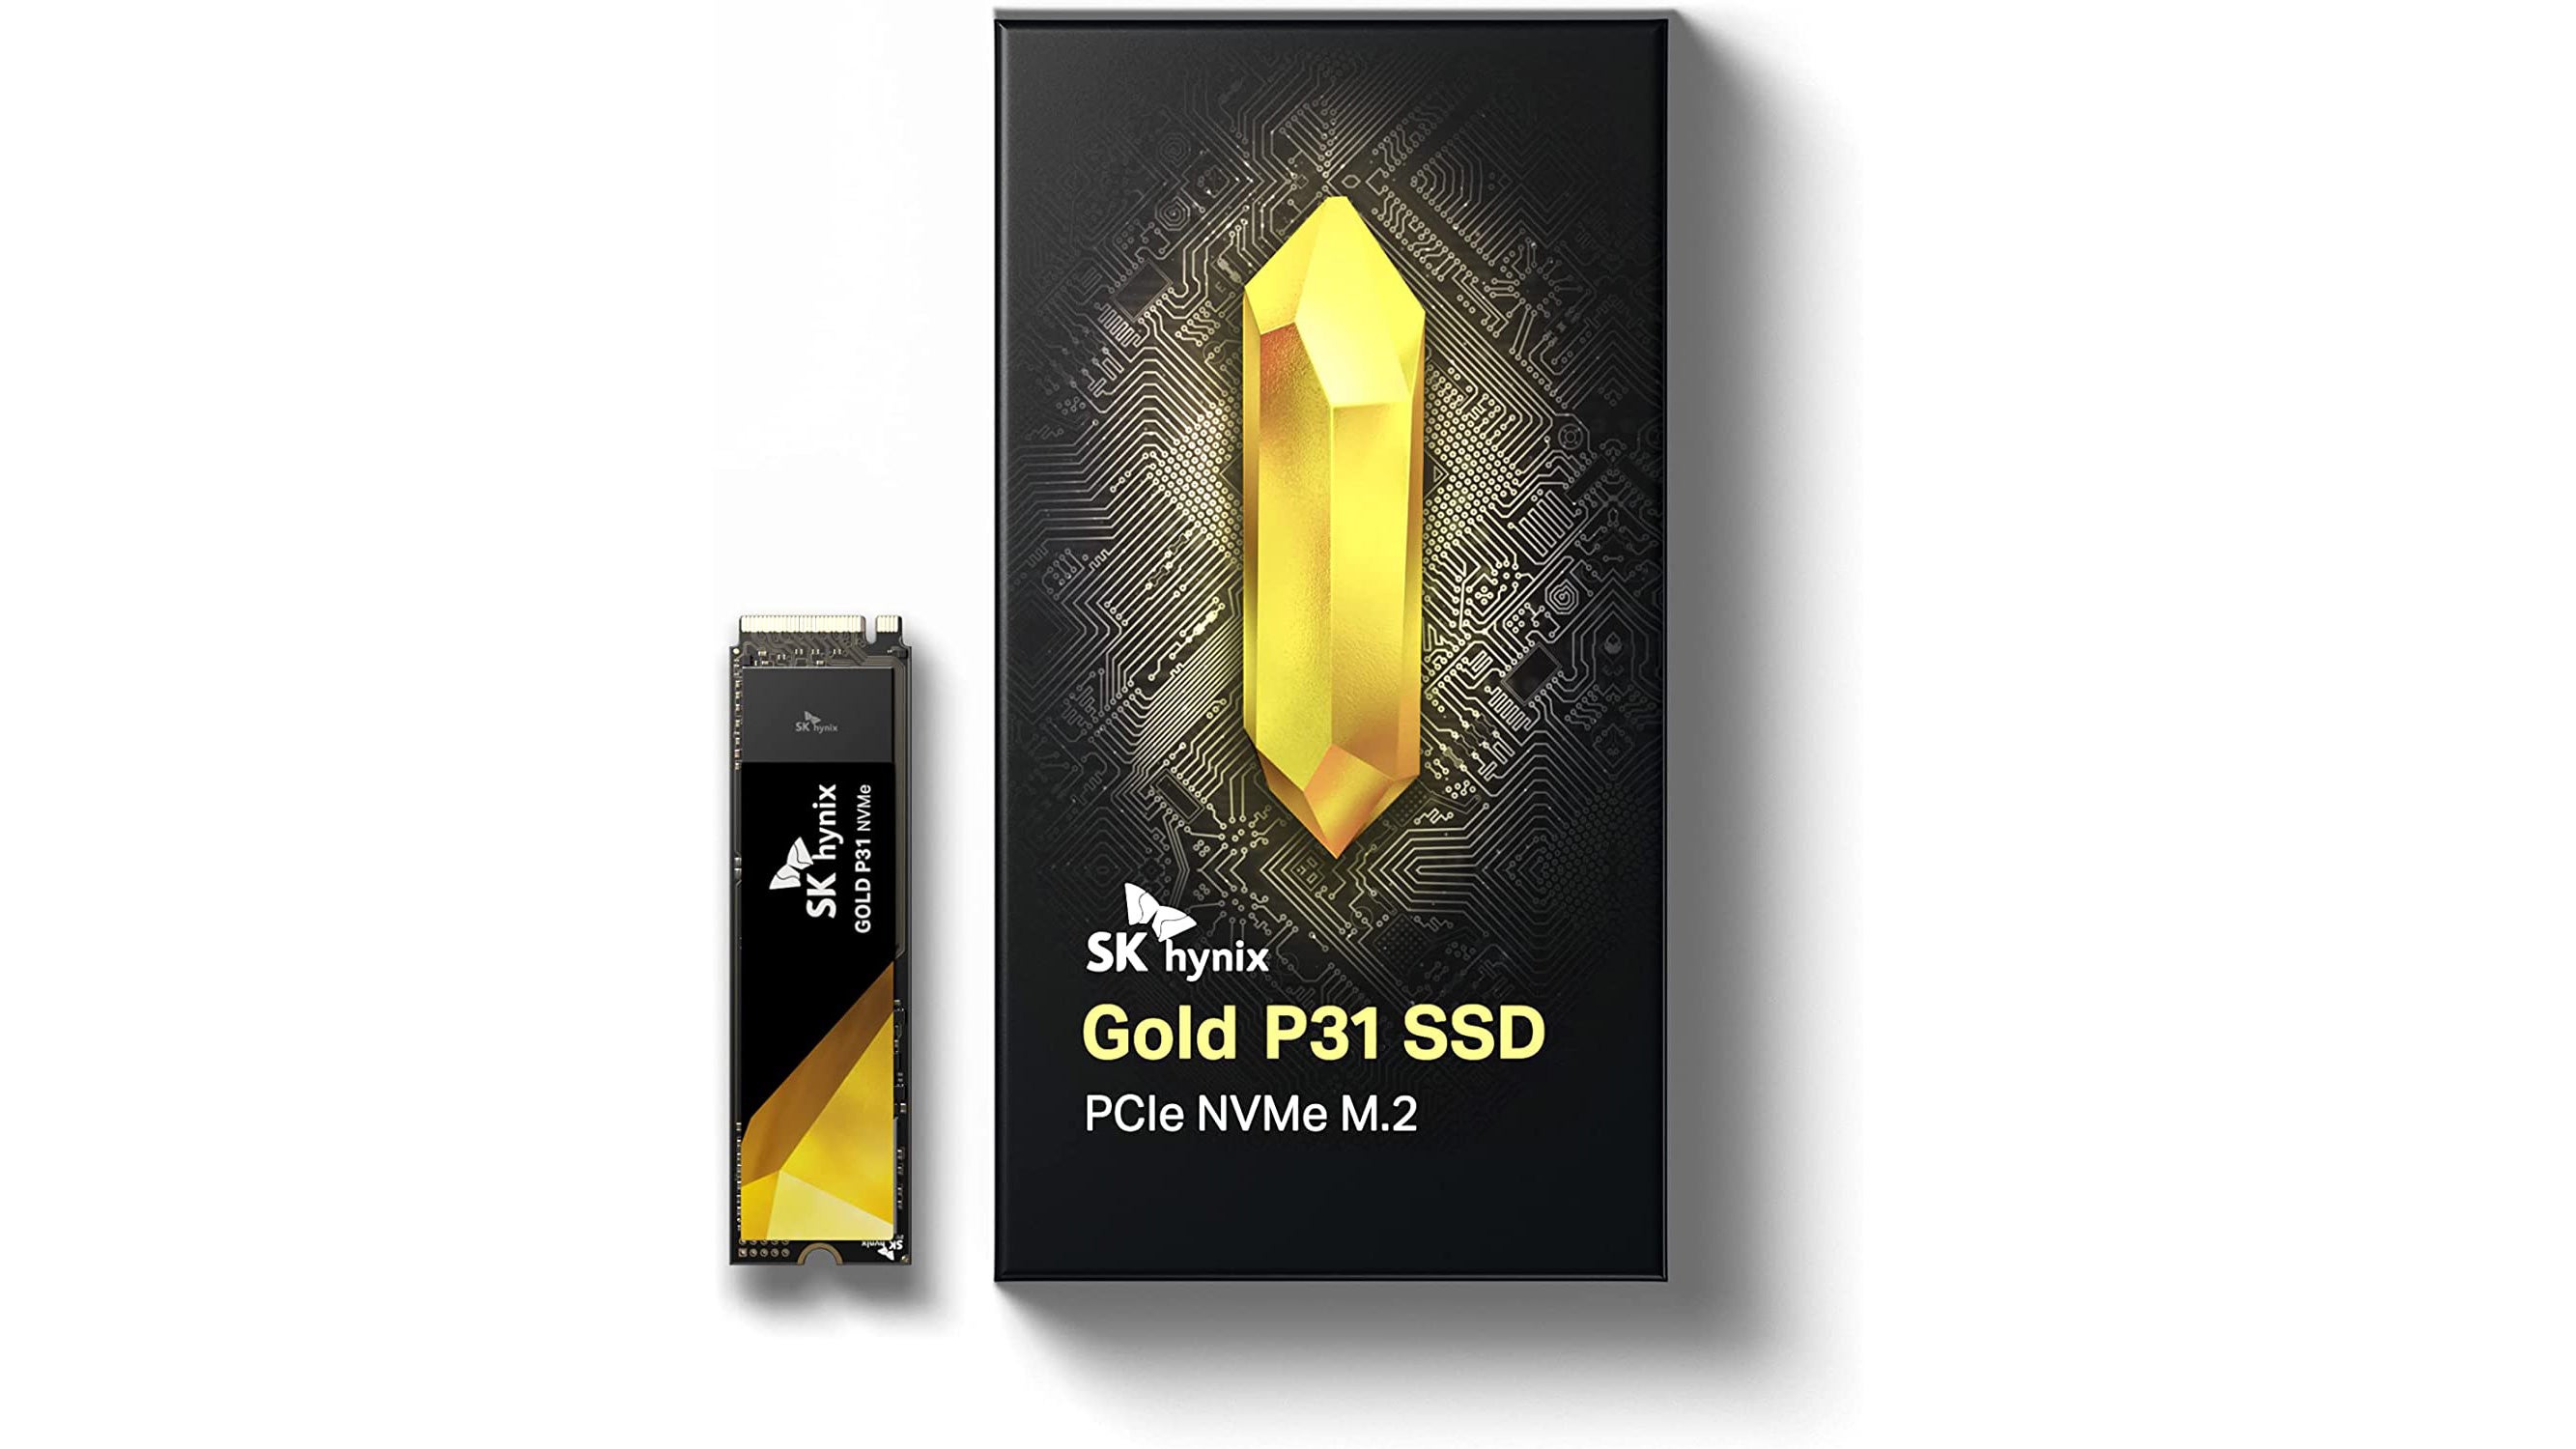 A SK Hynix Gold P31 NVMe SSD, shown in a black and gold colour scheme